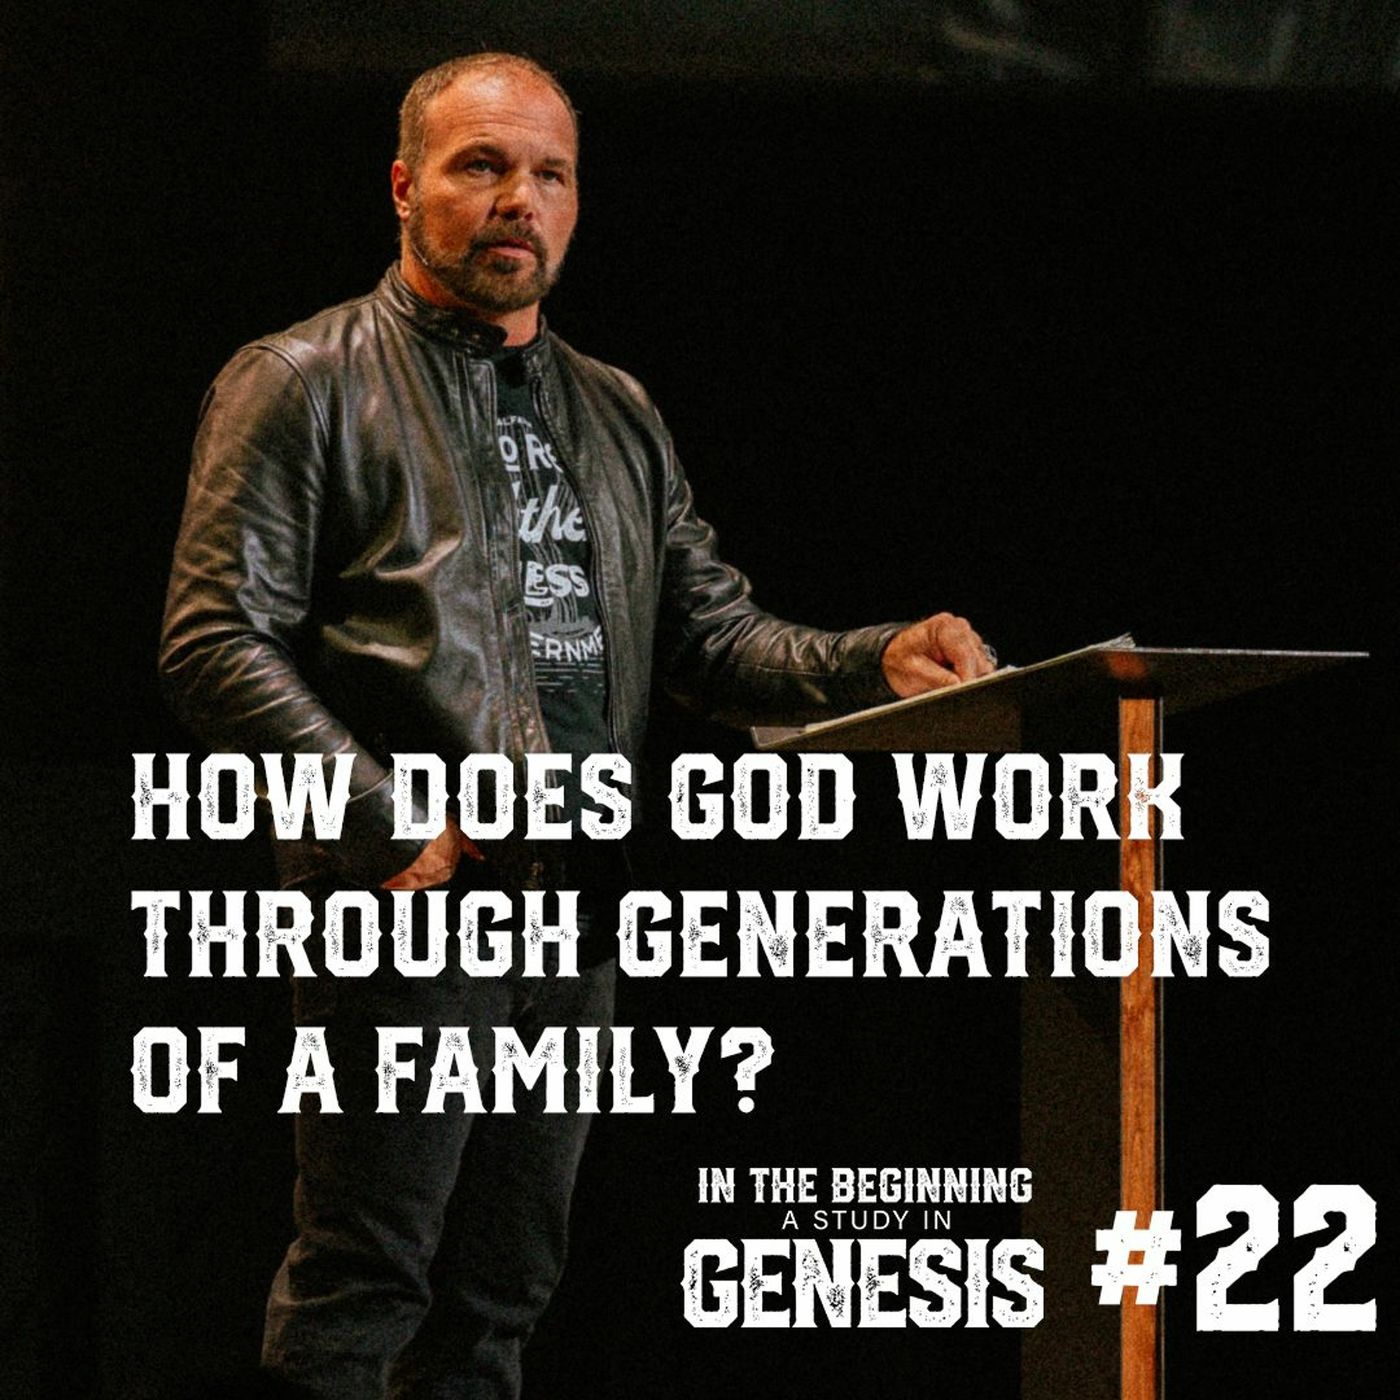 Genesis #22 - How Does God Work Through Generations of a Family?